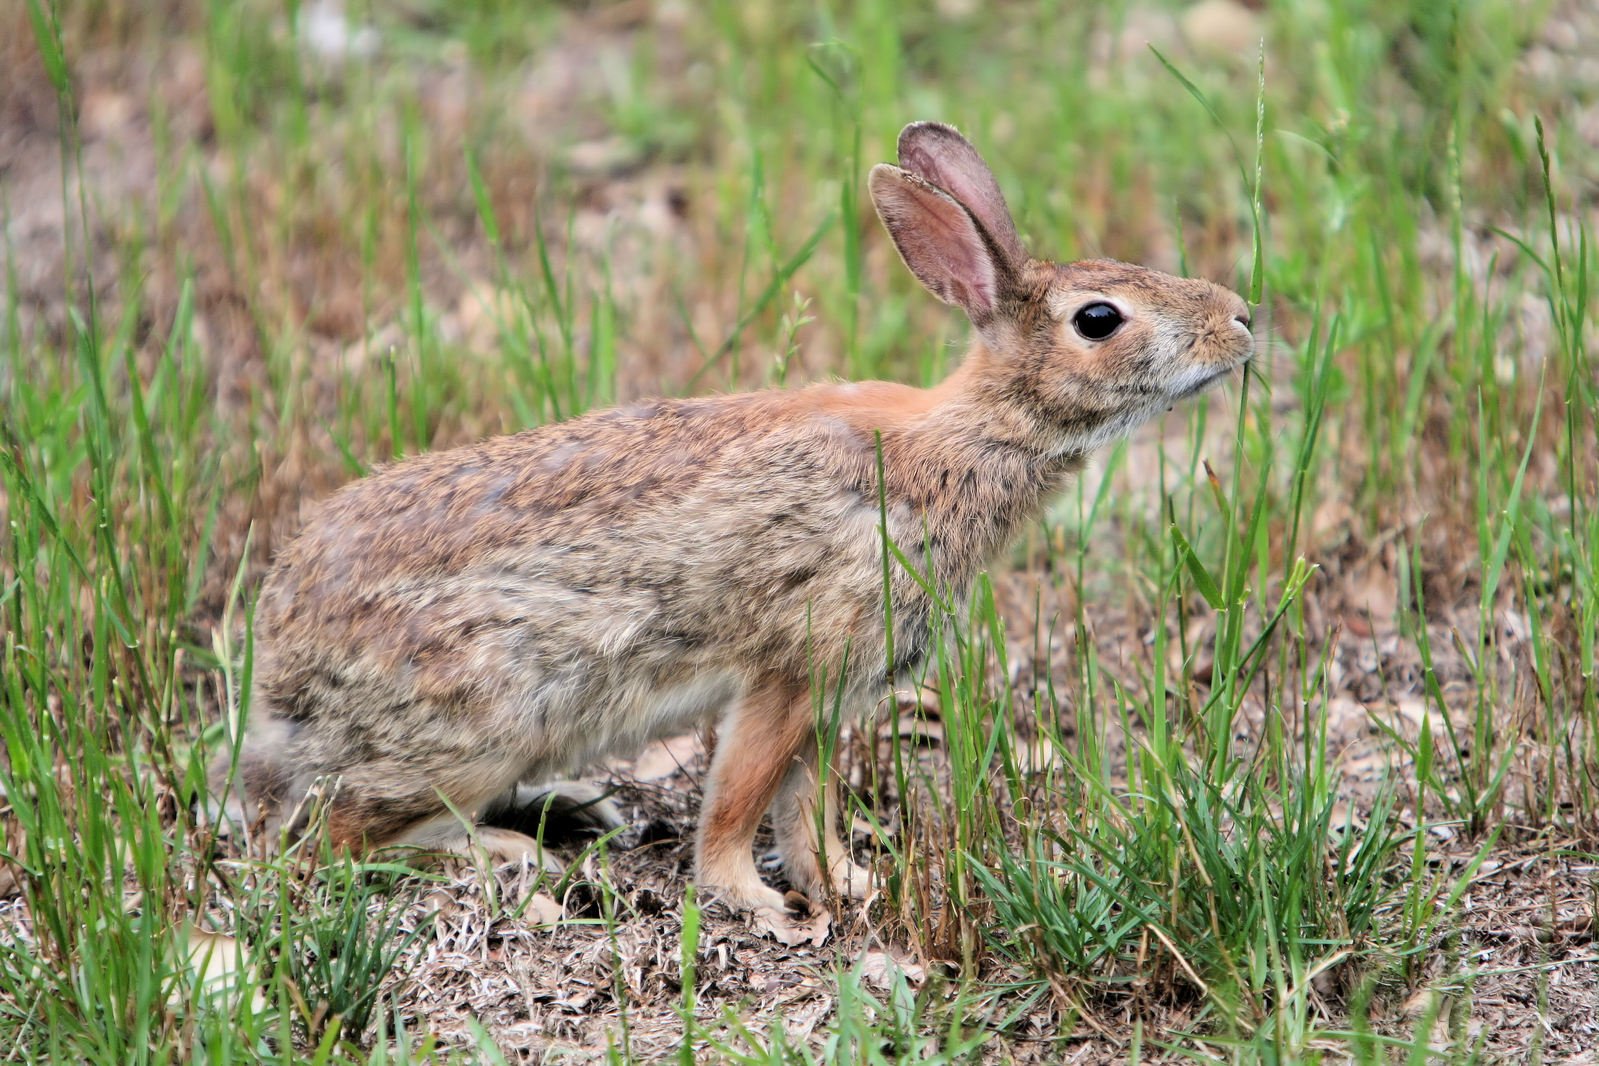 a small rabbit standing in a grassy area